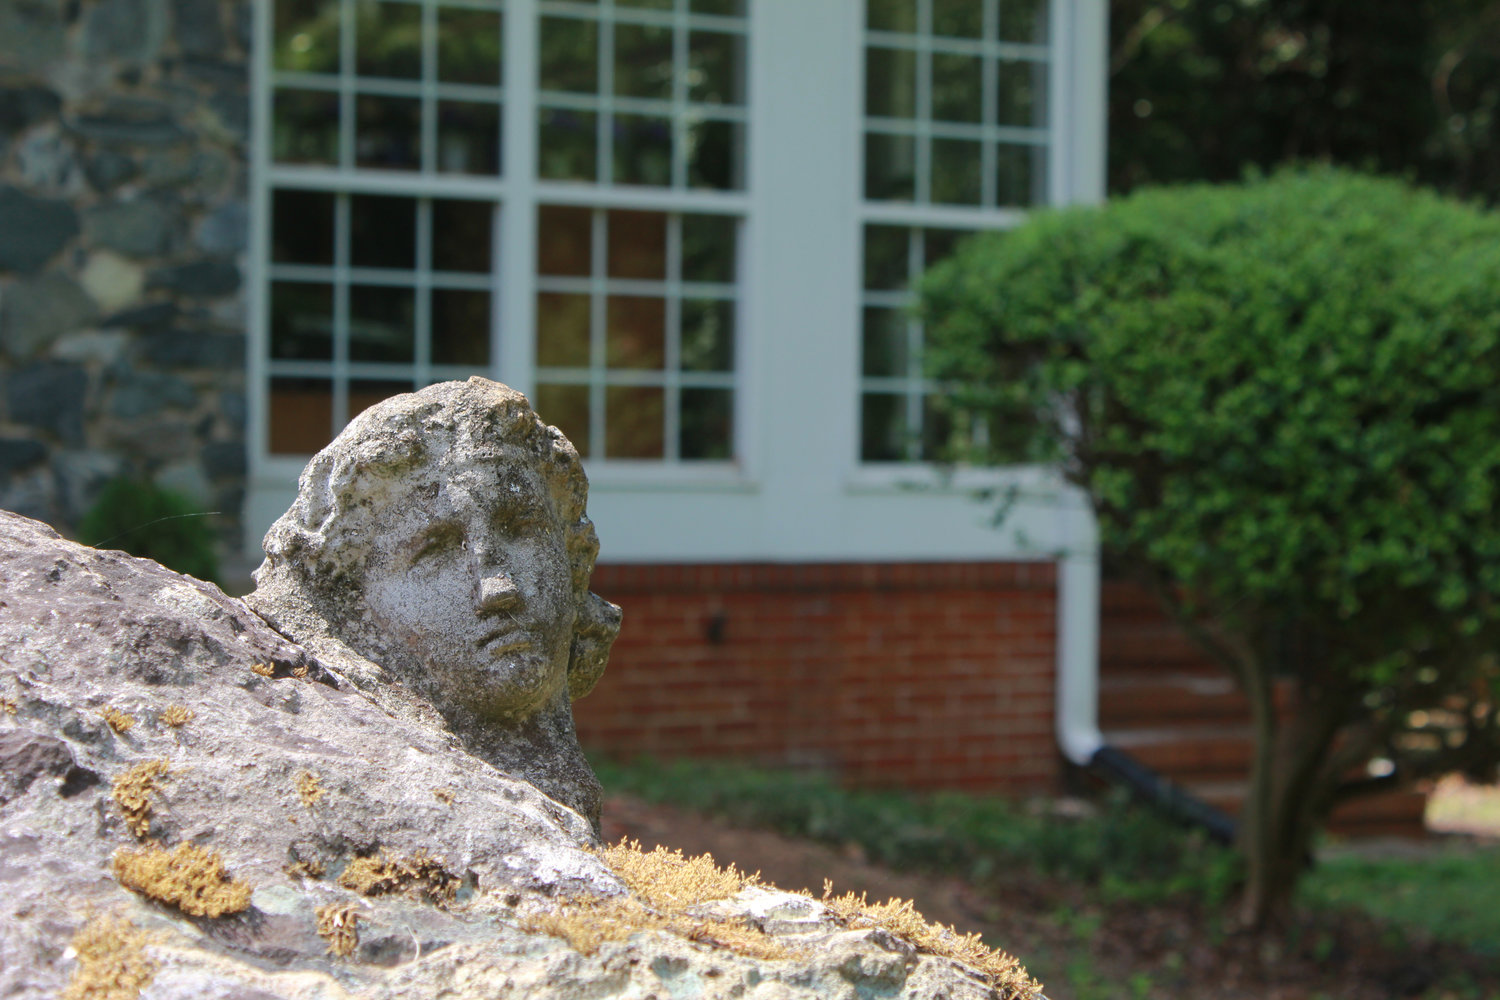 A stone face pokes out from where it is carved into a rock in the front of the home formerly known as Aunt Bee’s house in SIler City. New owner Kathy Nail, who moved from California, is currently working on the landscape of the house and taming the overgrowth of trees and ivy.